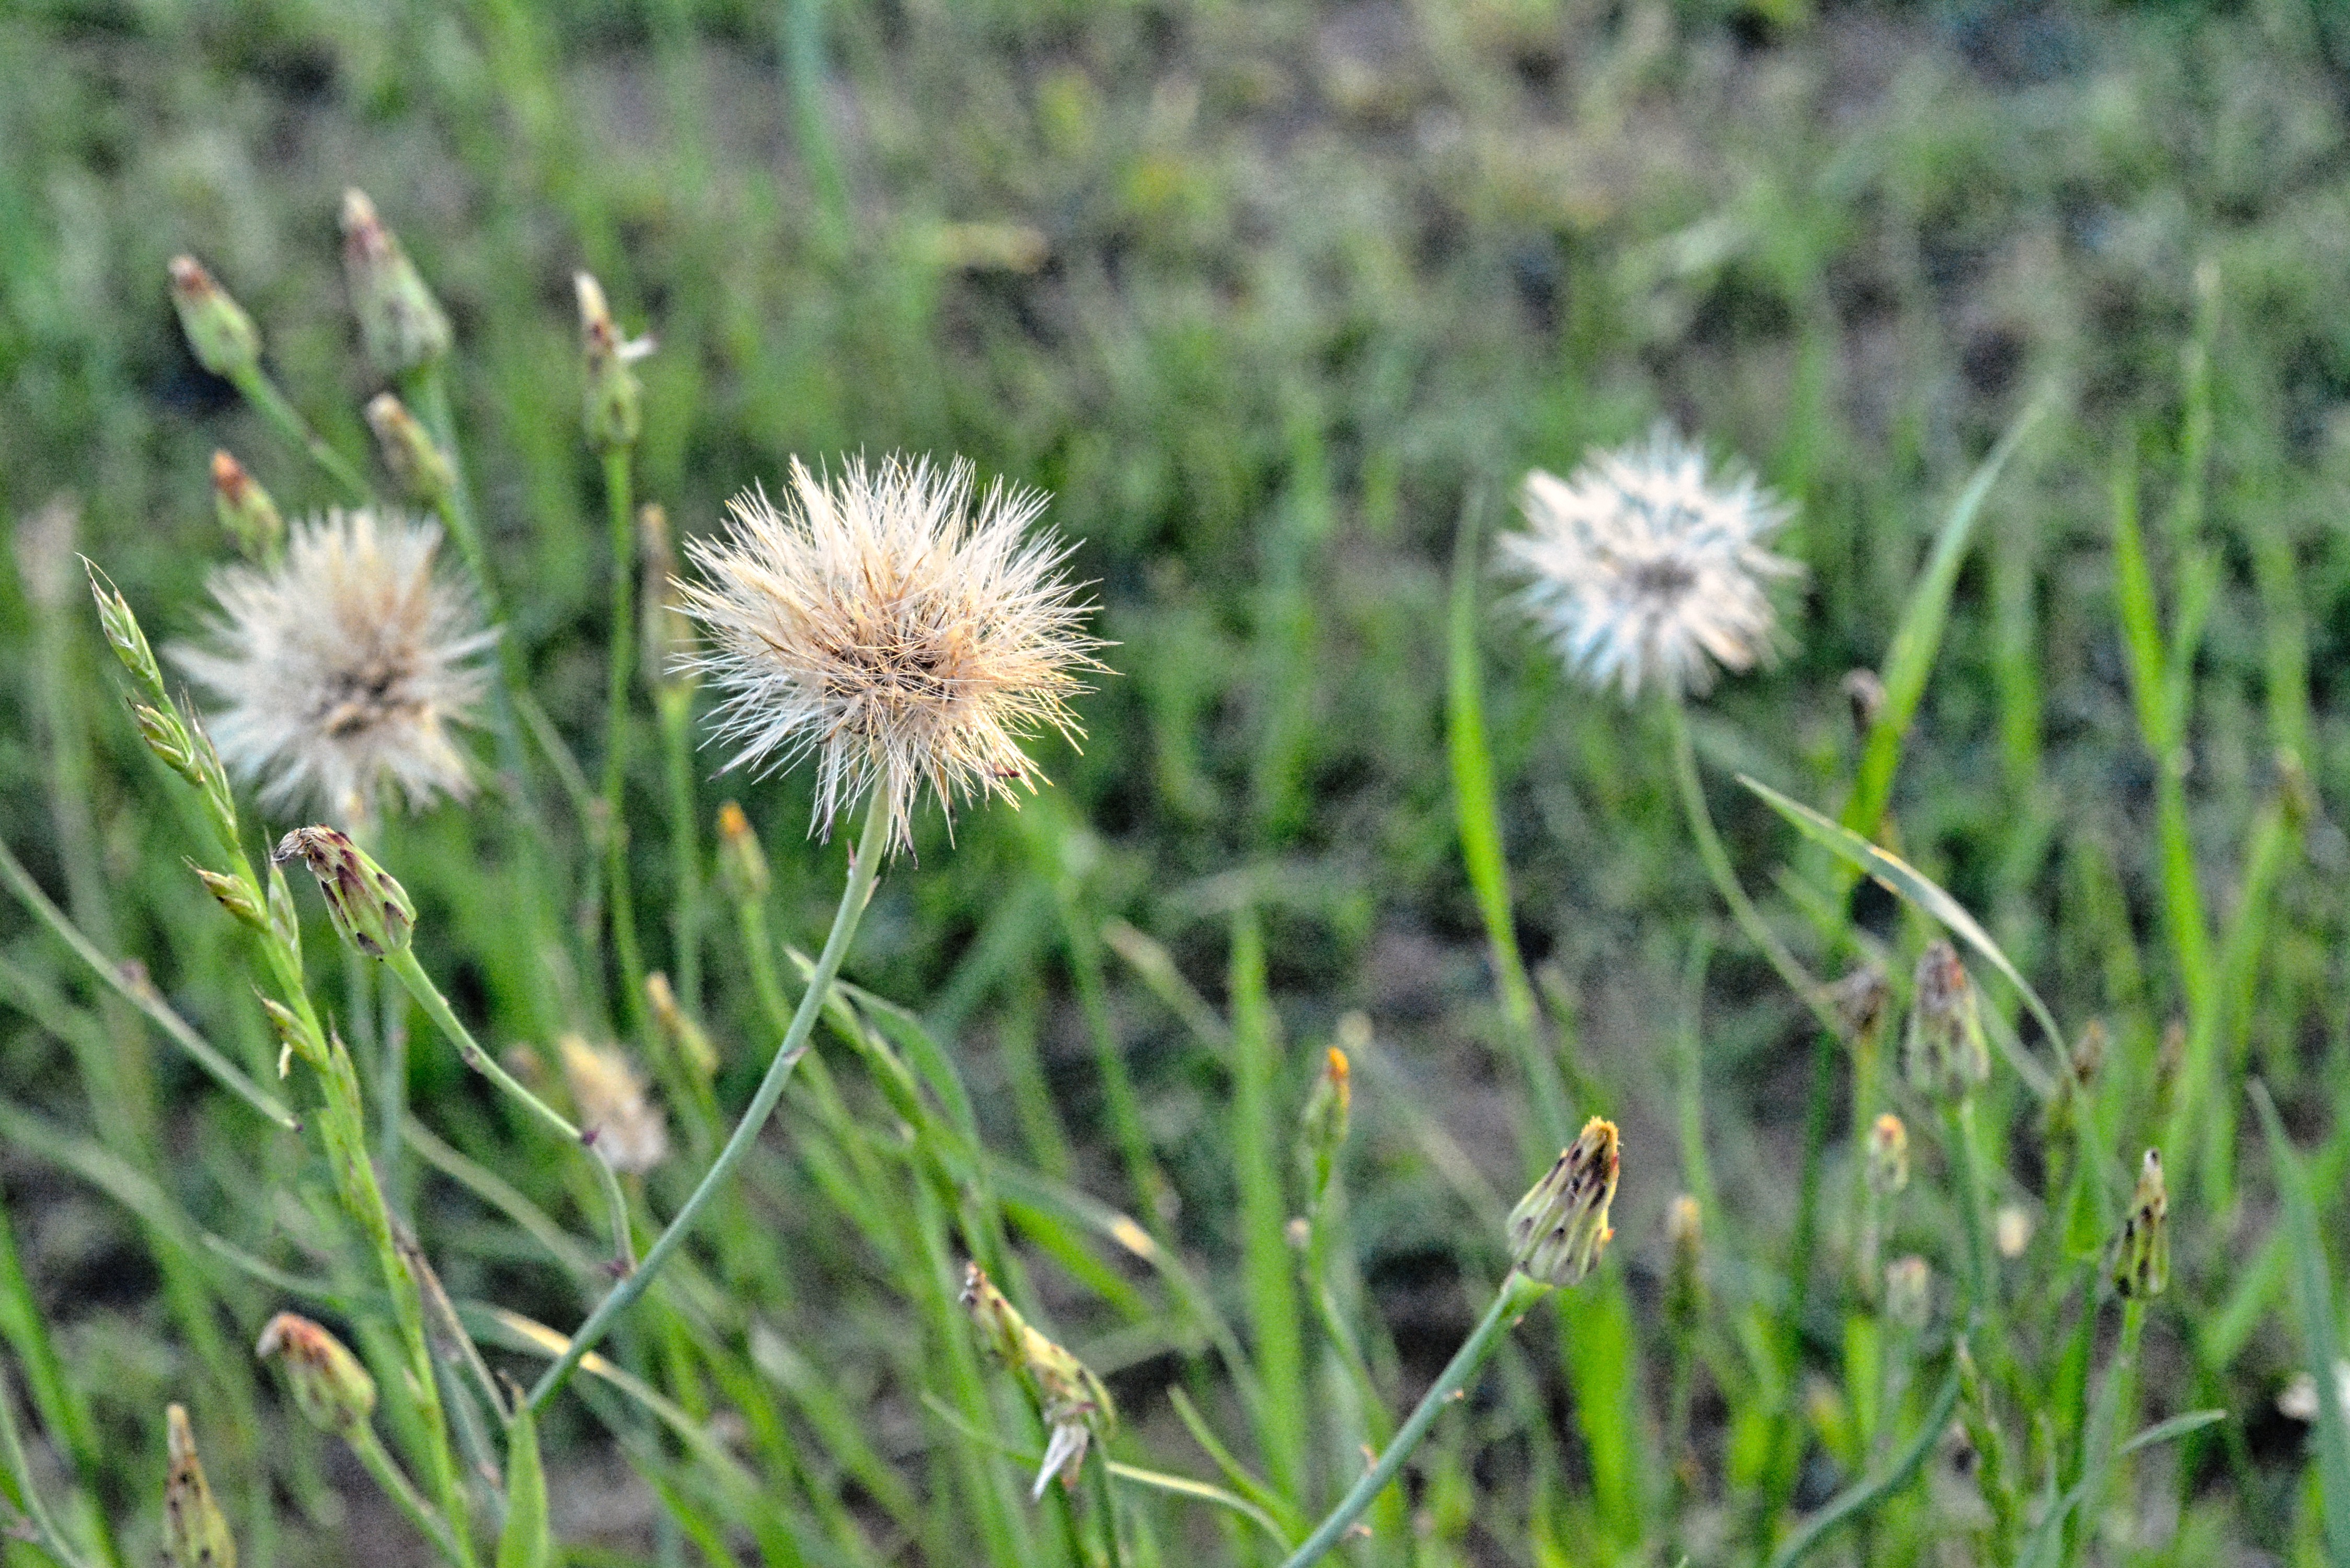 three dandelions in a field of green with one dandelion clearly focused in the foreground and two others blurry behind it